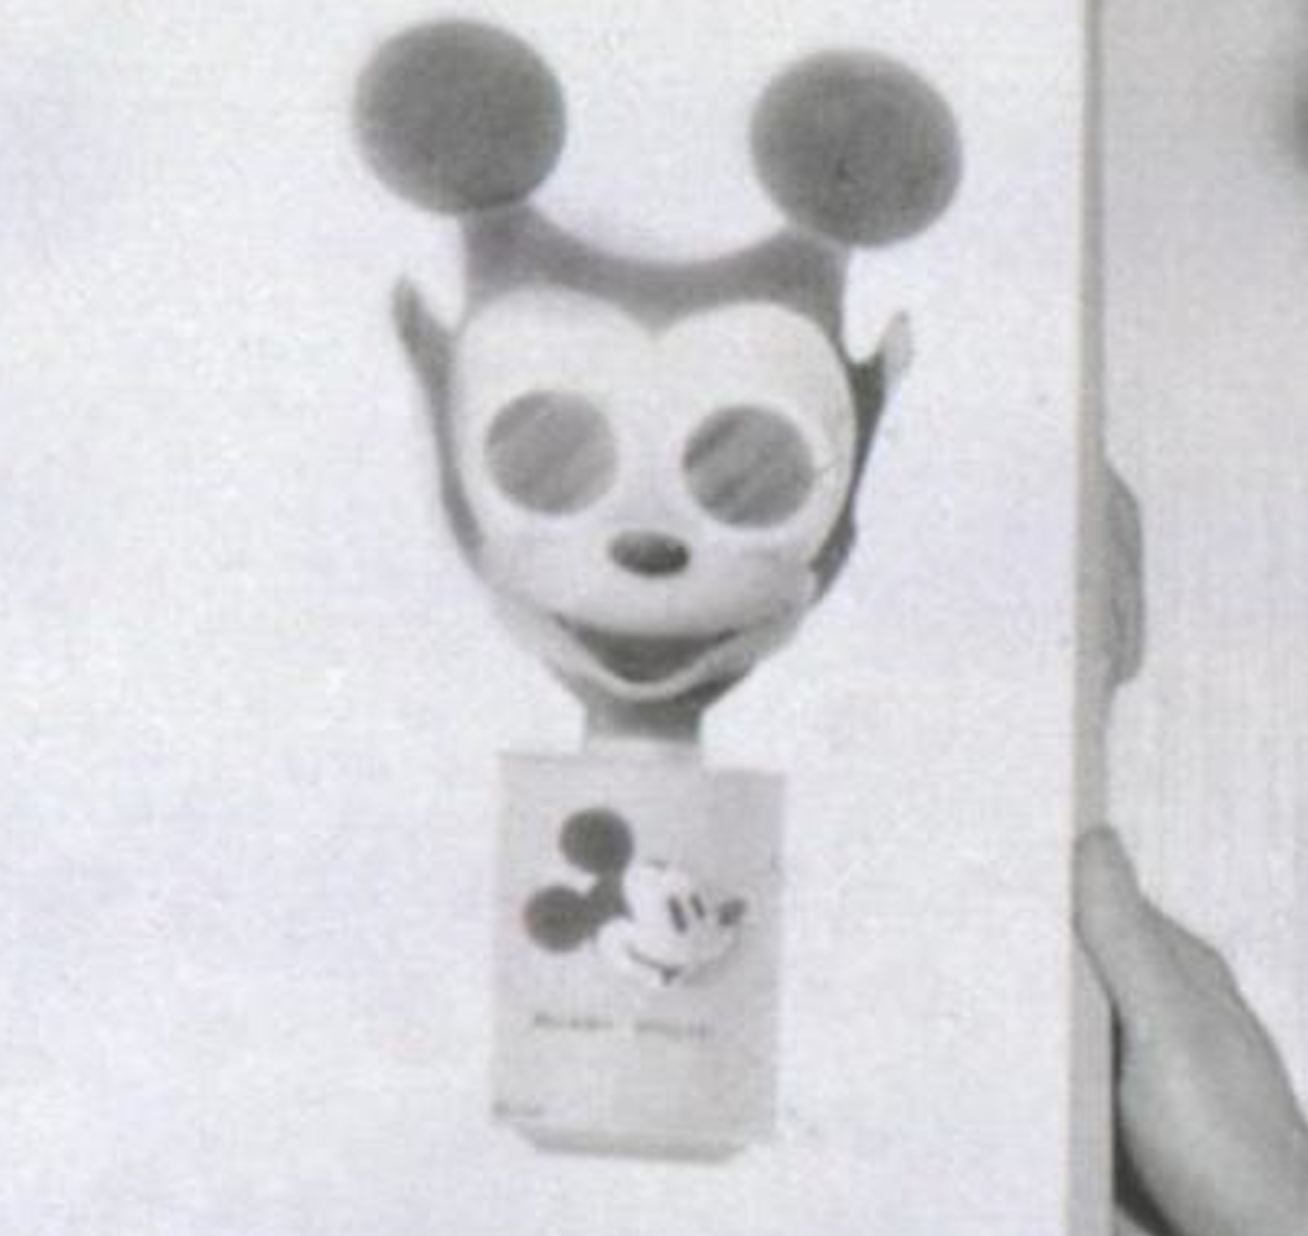 Mickey Mouse gas mask